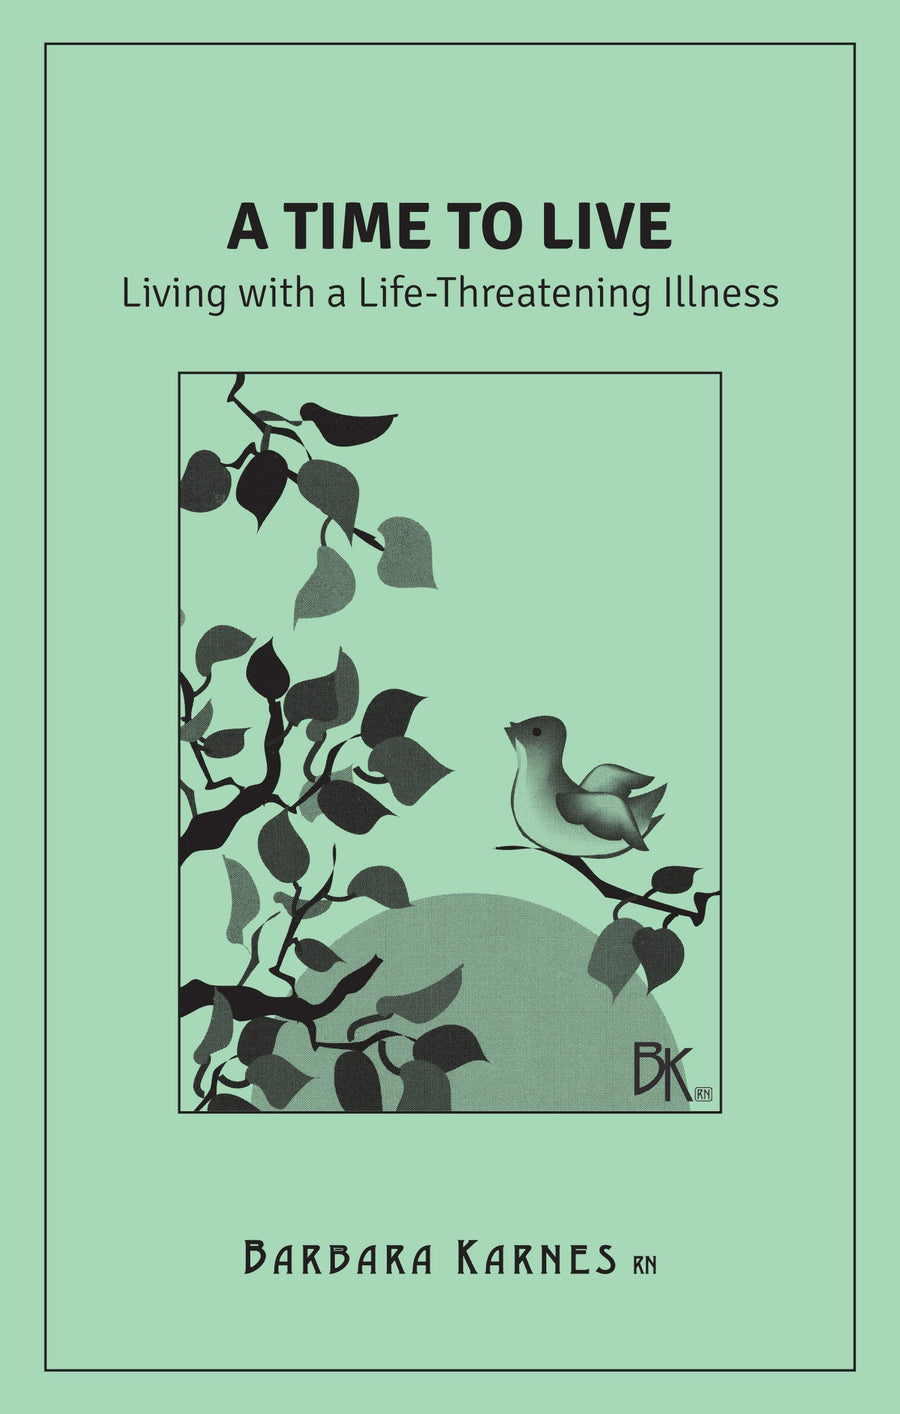 “A Time To Live” is literature for the newly diagnosed with a poor prognosis and/or the palliative care patient; for anyone faced with the unpredictability of their future due to living with a life threatening illness. It offers guidance for living and explains comfort control, nutrition, sleep, pain medications, overdosing and addiction possibilities as they relate to a serious illnesses as well as the fear of death that we all bring to this final experience.